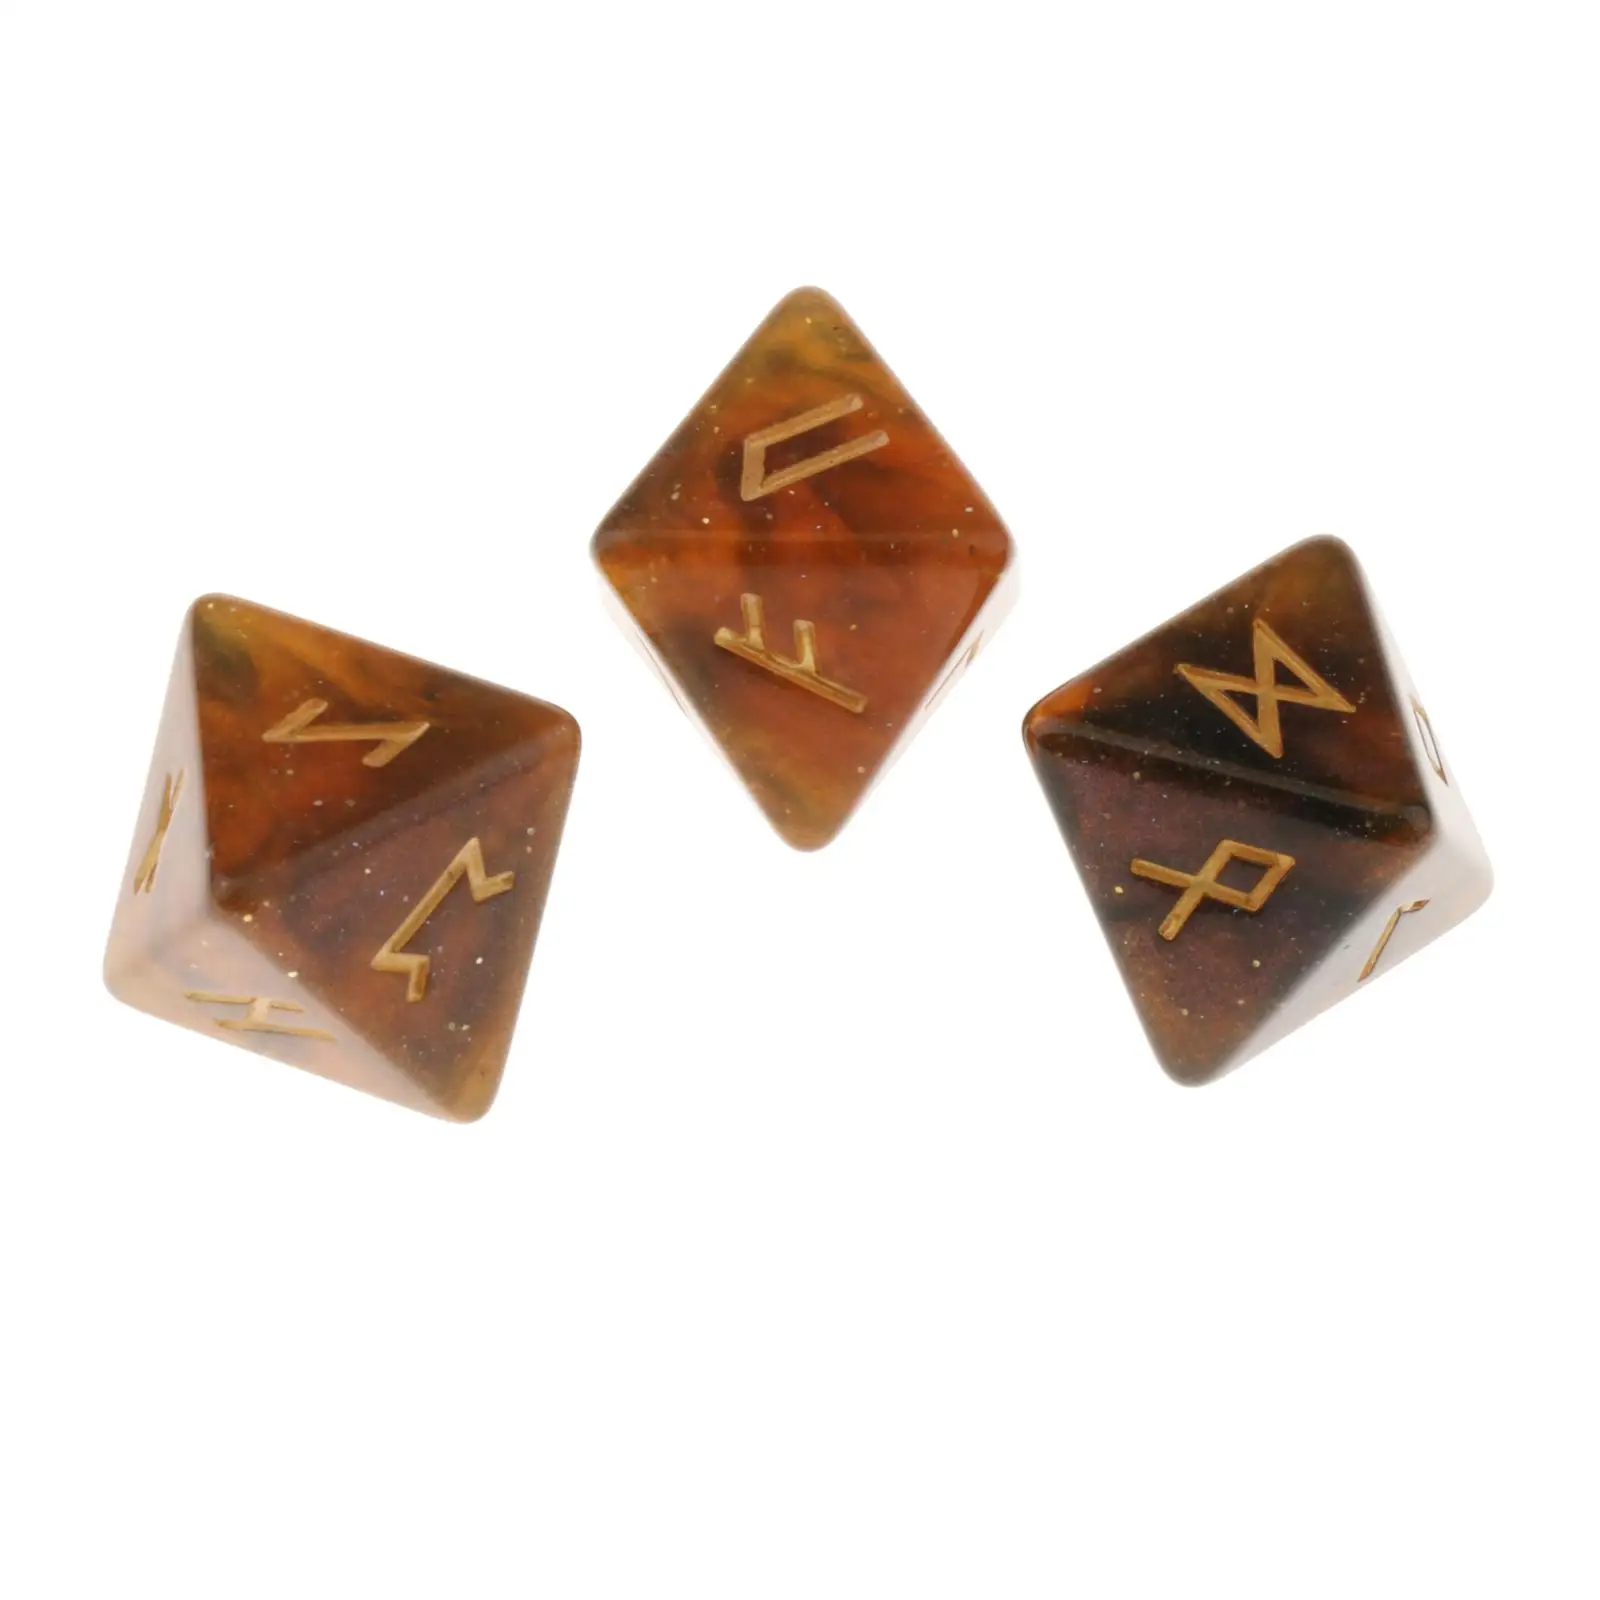 Starry Star Rune Resin Tarot Exquisite Divination Dice Constellation for